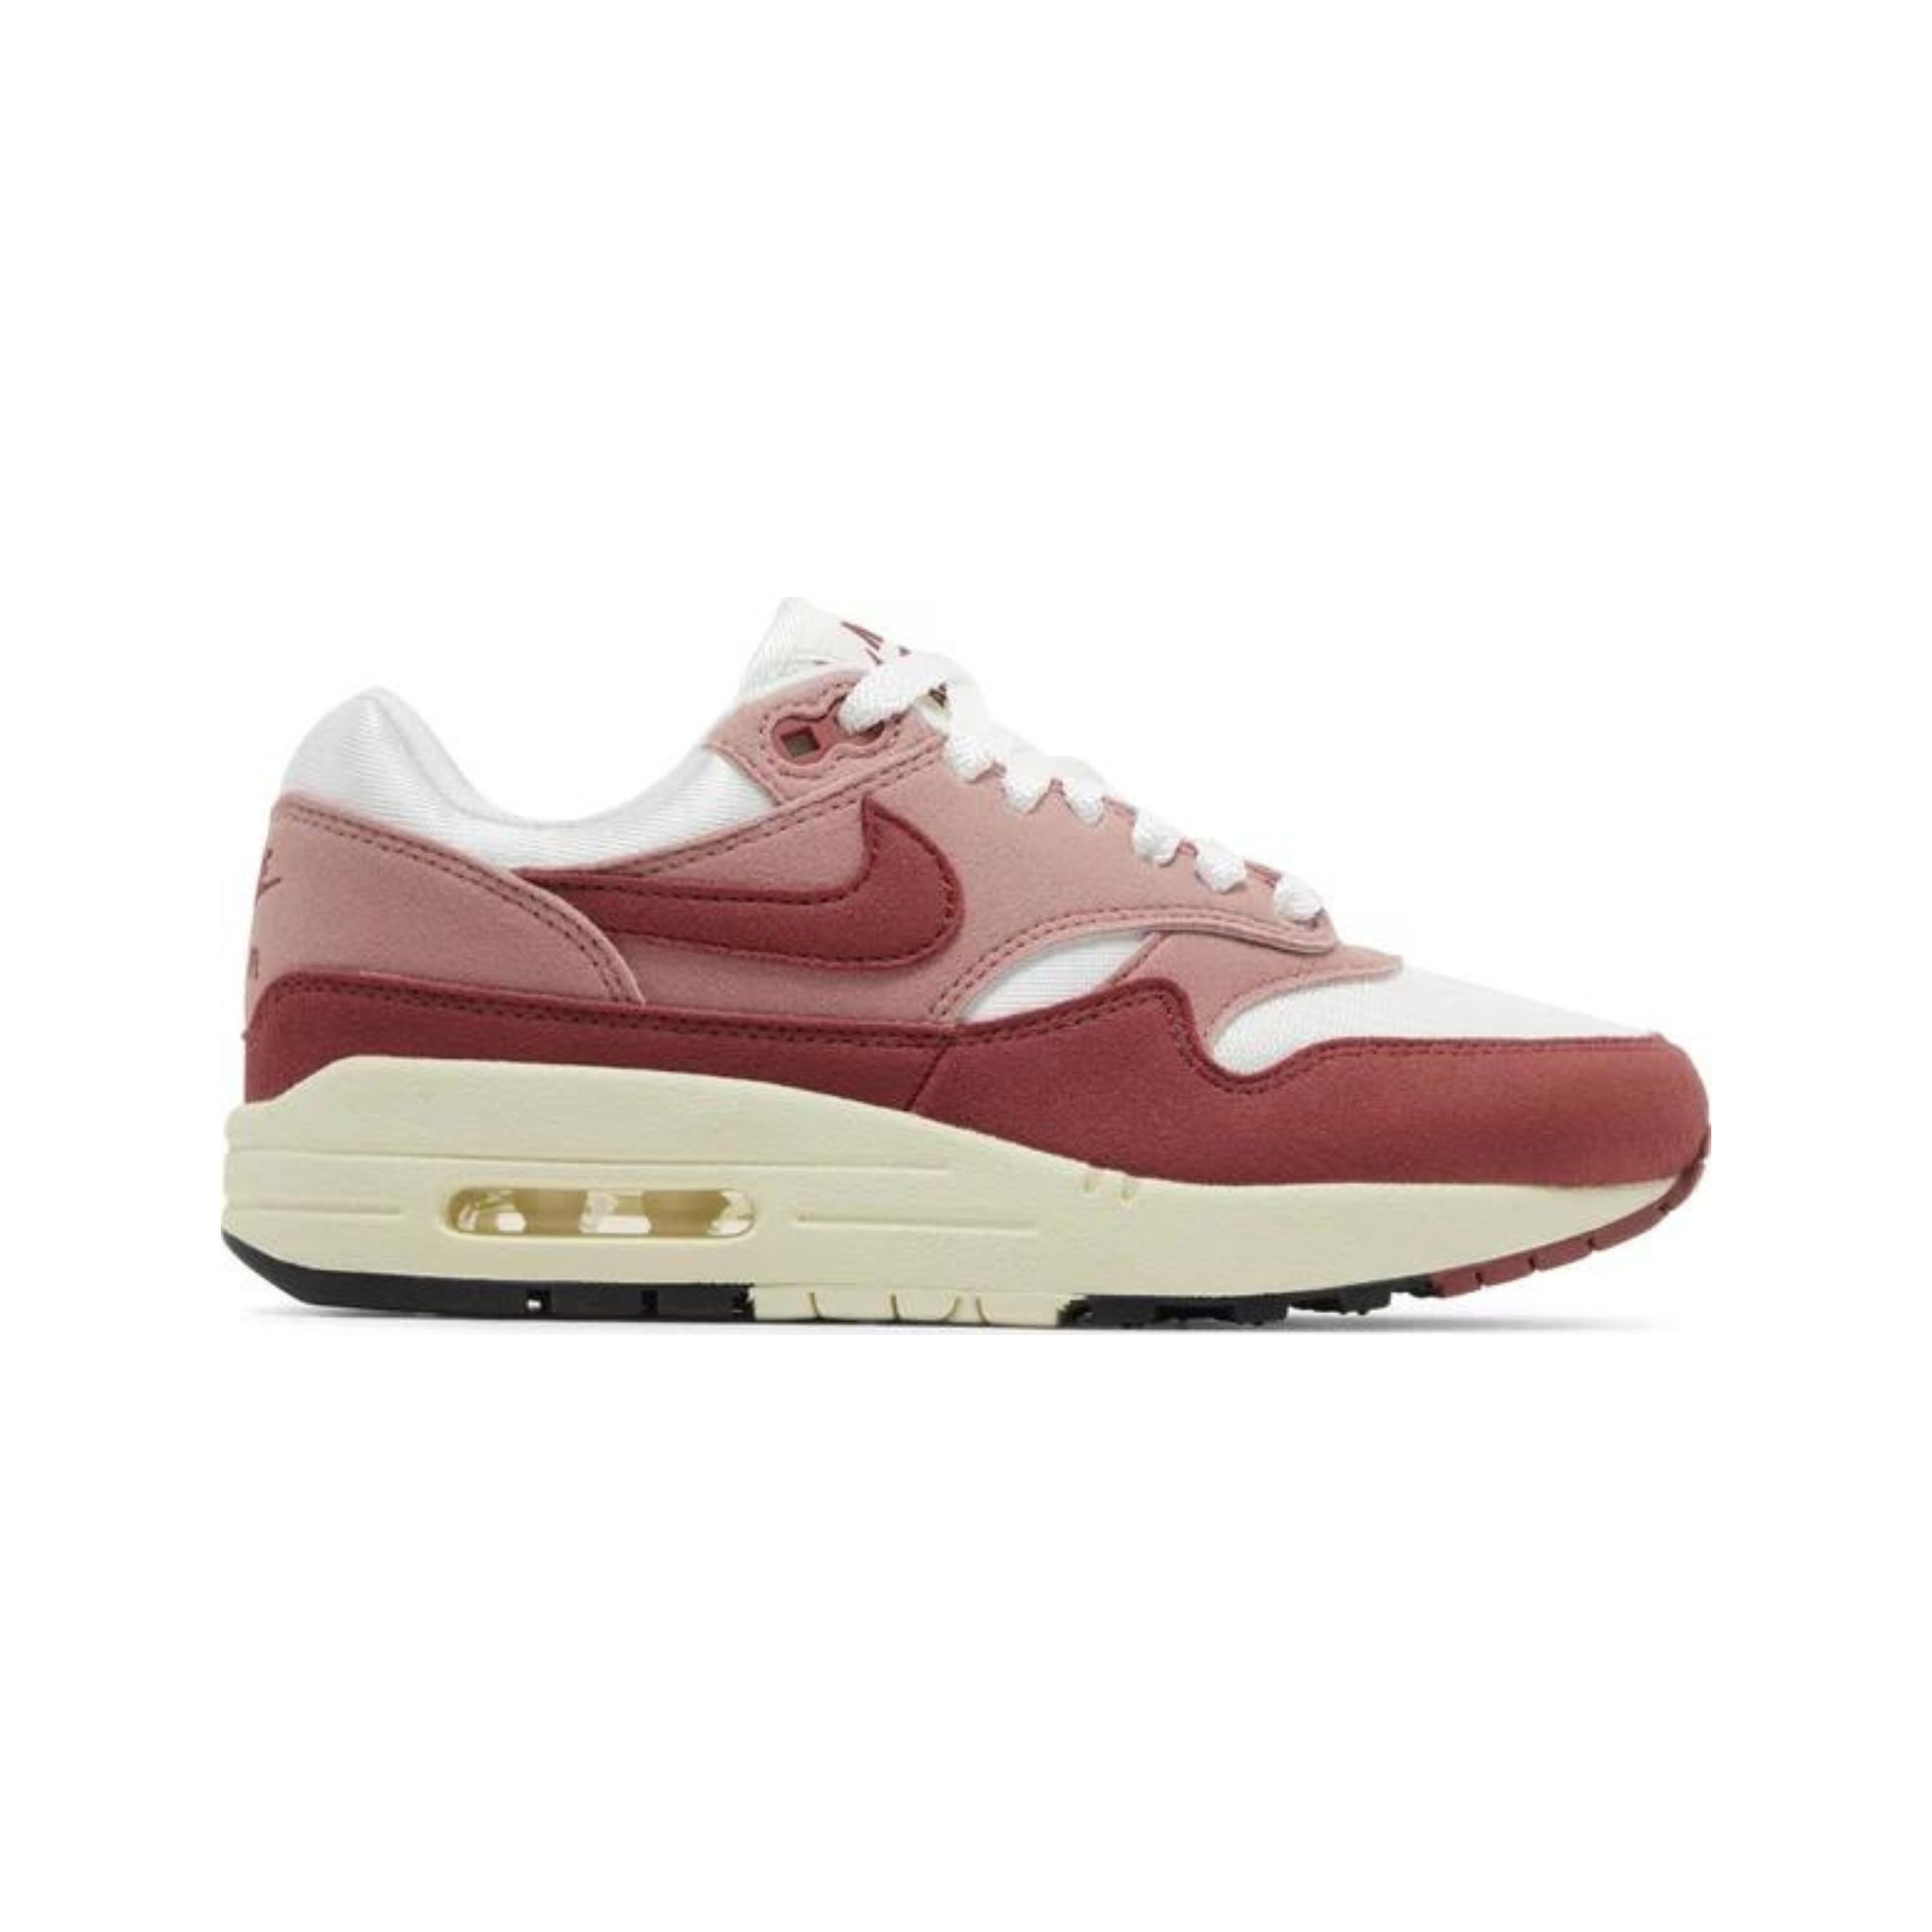 Nike Air Max 1 Red Stardust (Women's)